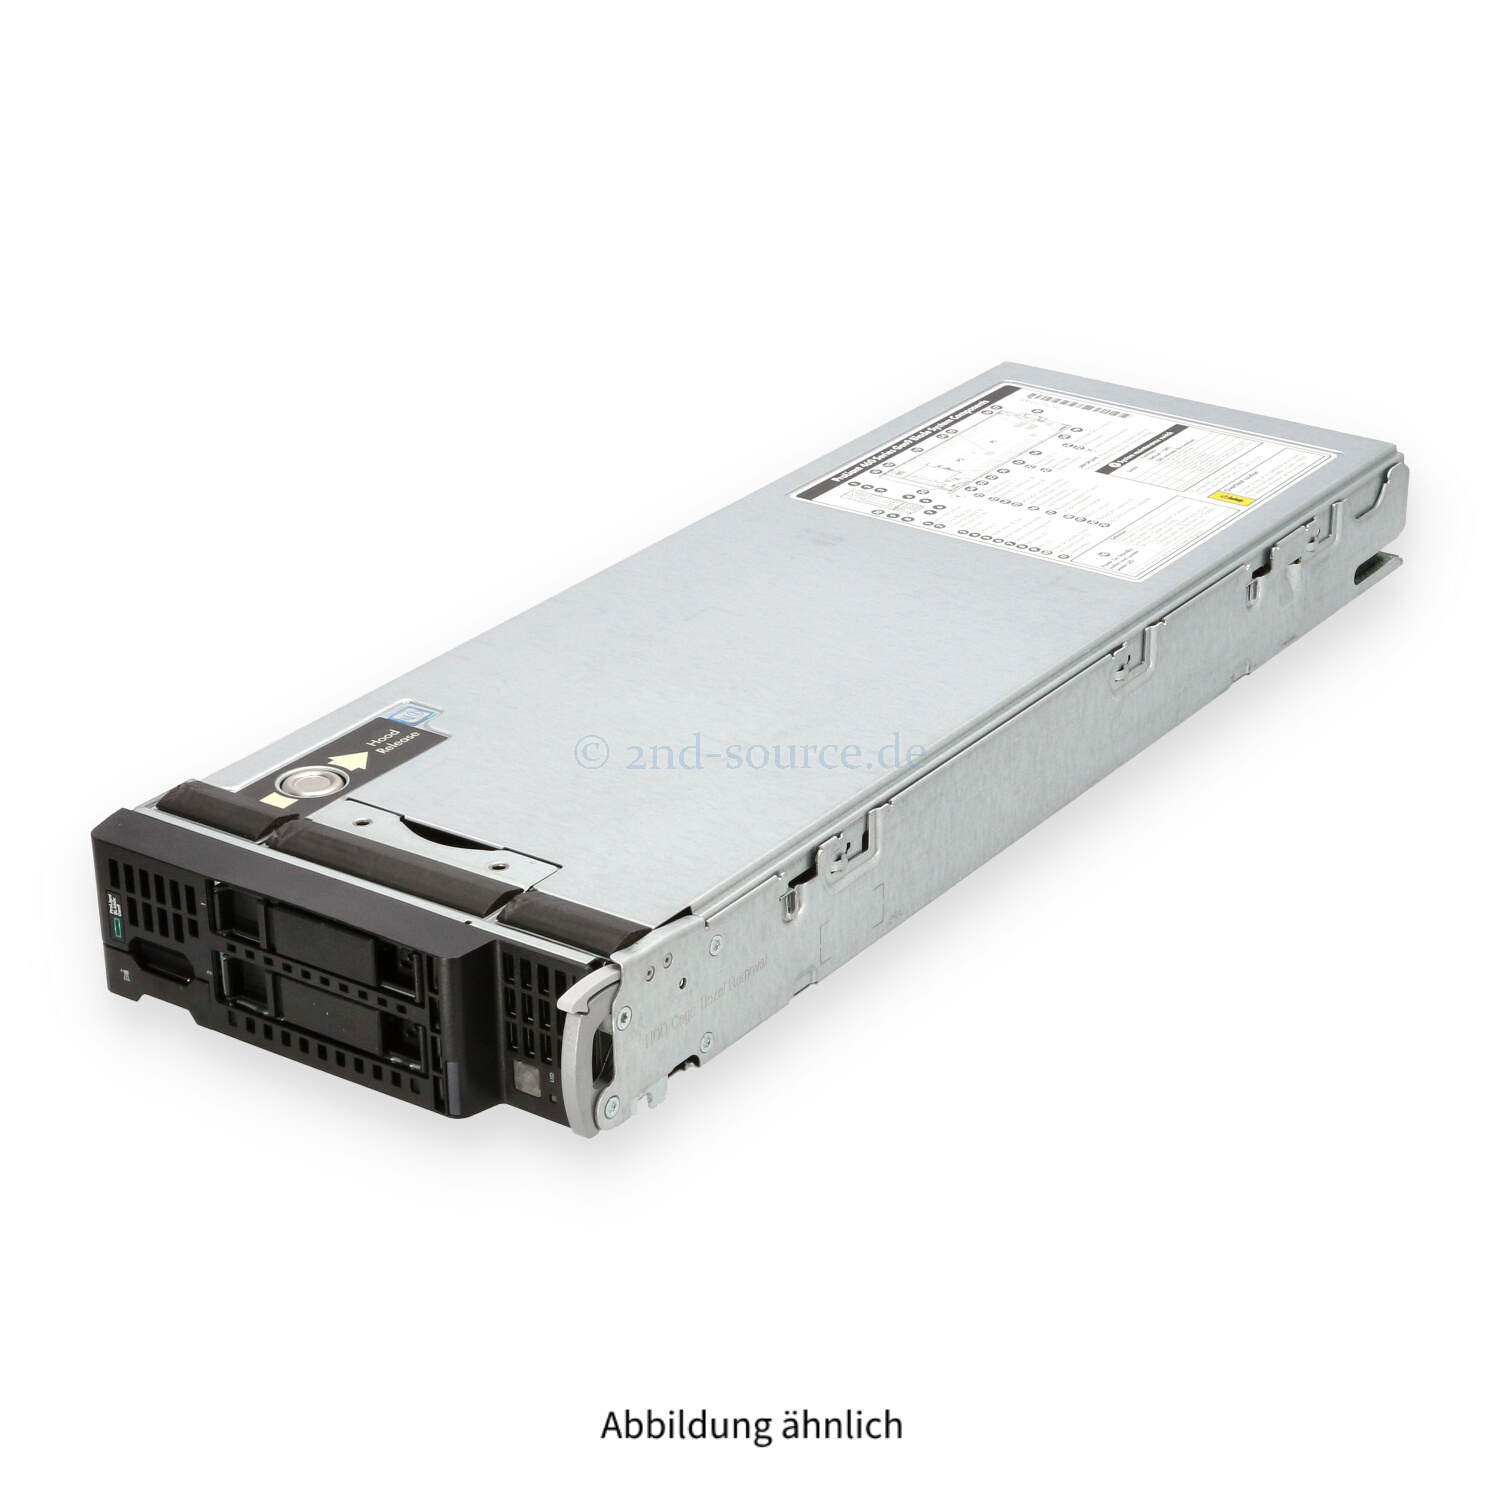 HPE BL460c G9 P244br/1GB v3 CTO Chassis 727021-B21 744409-001